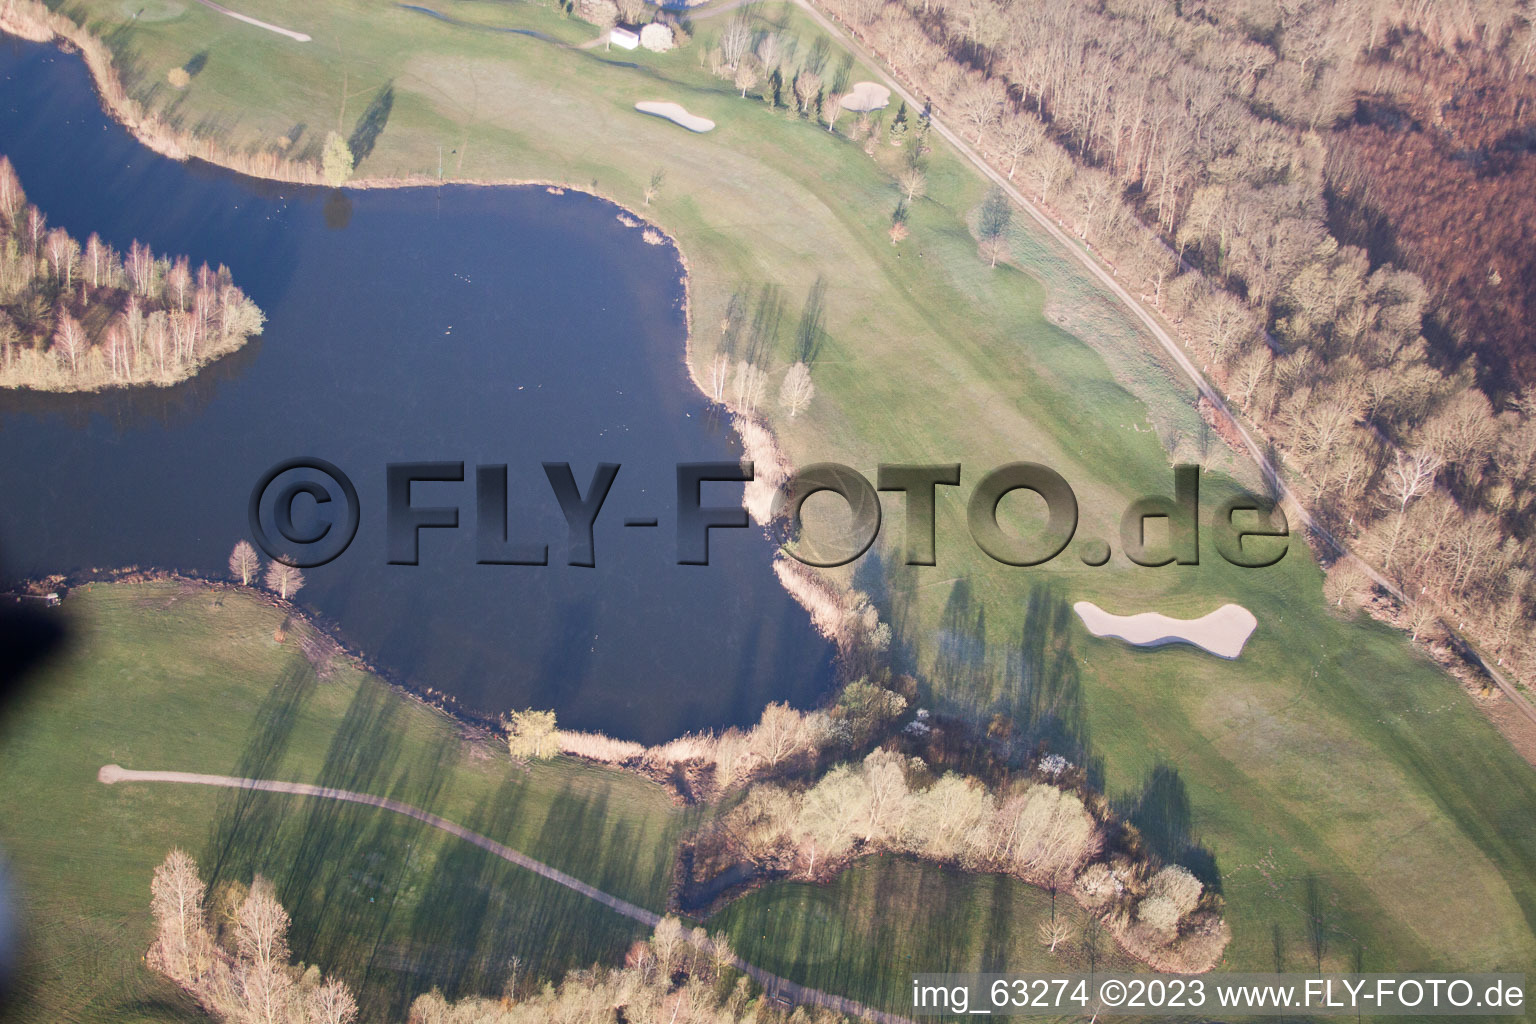 Dreihof Golf Club in Essingen in the state Rhineland-Palatinate, Germany from the plane